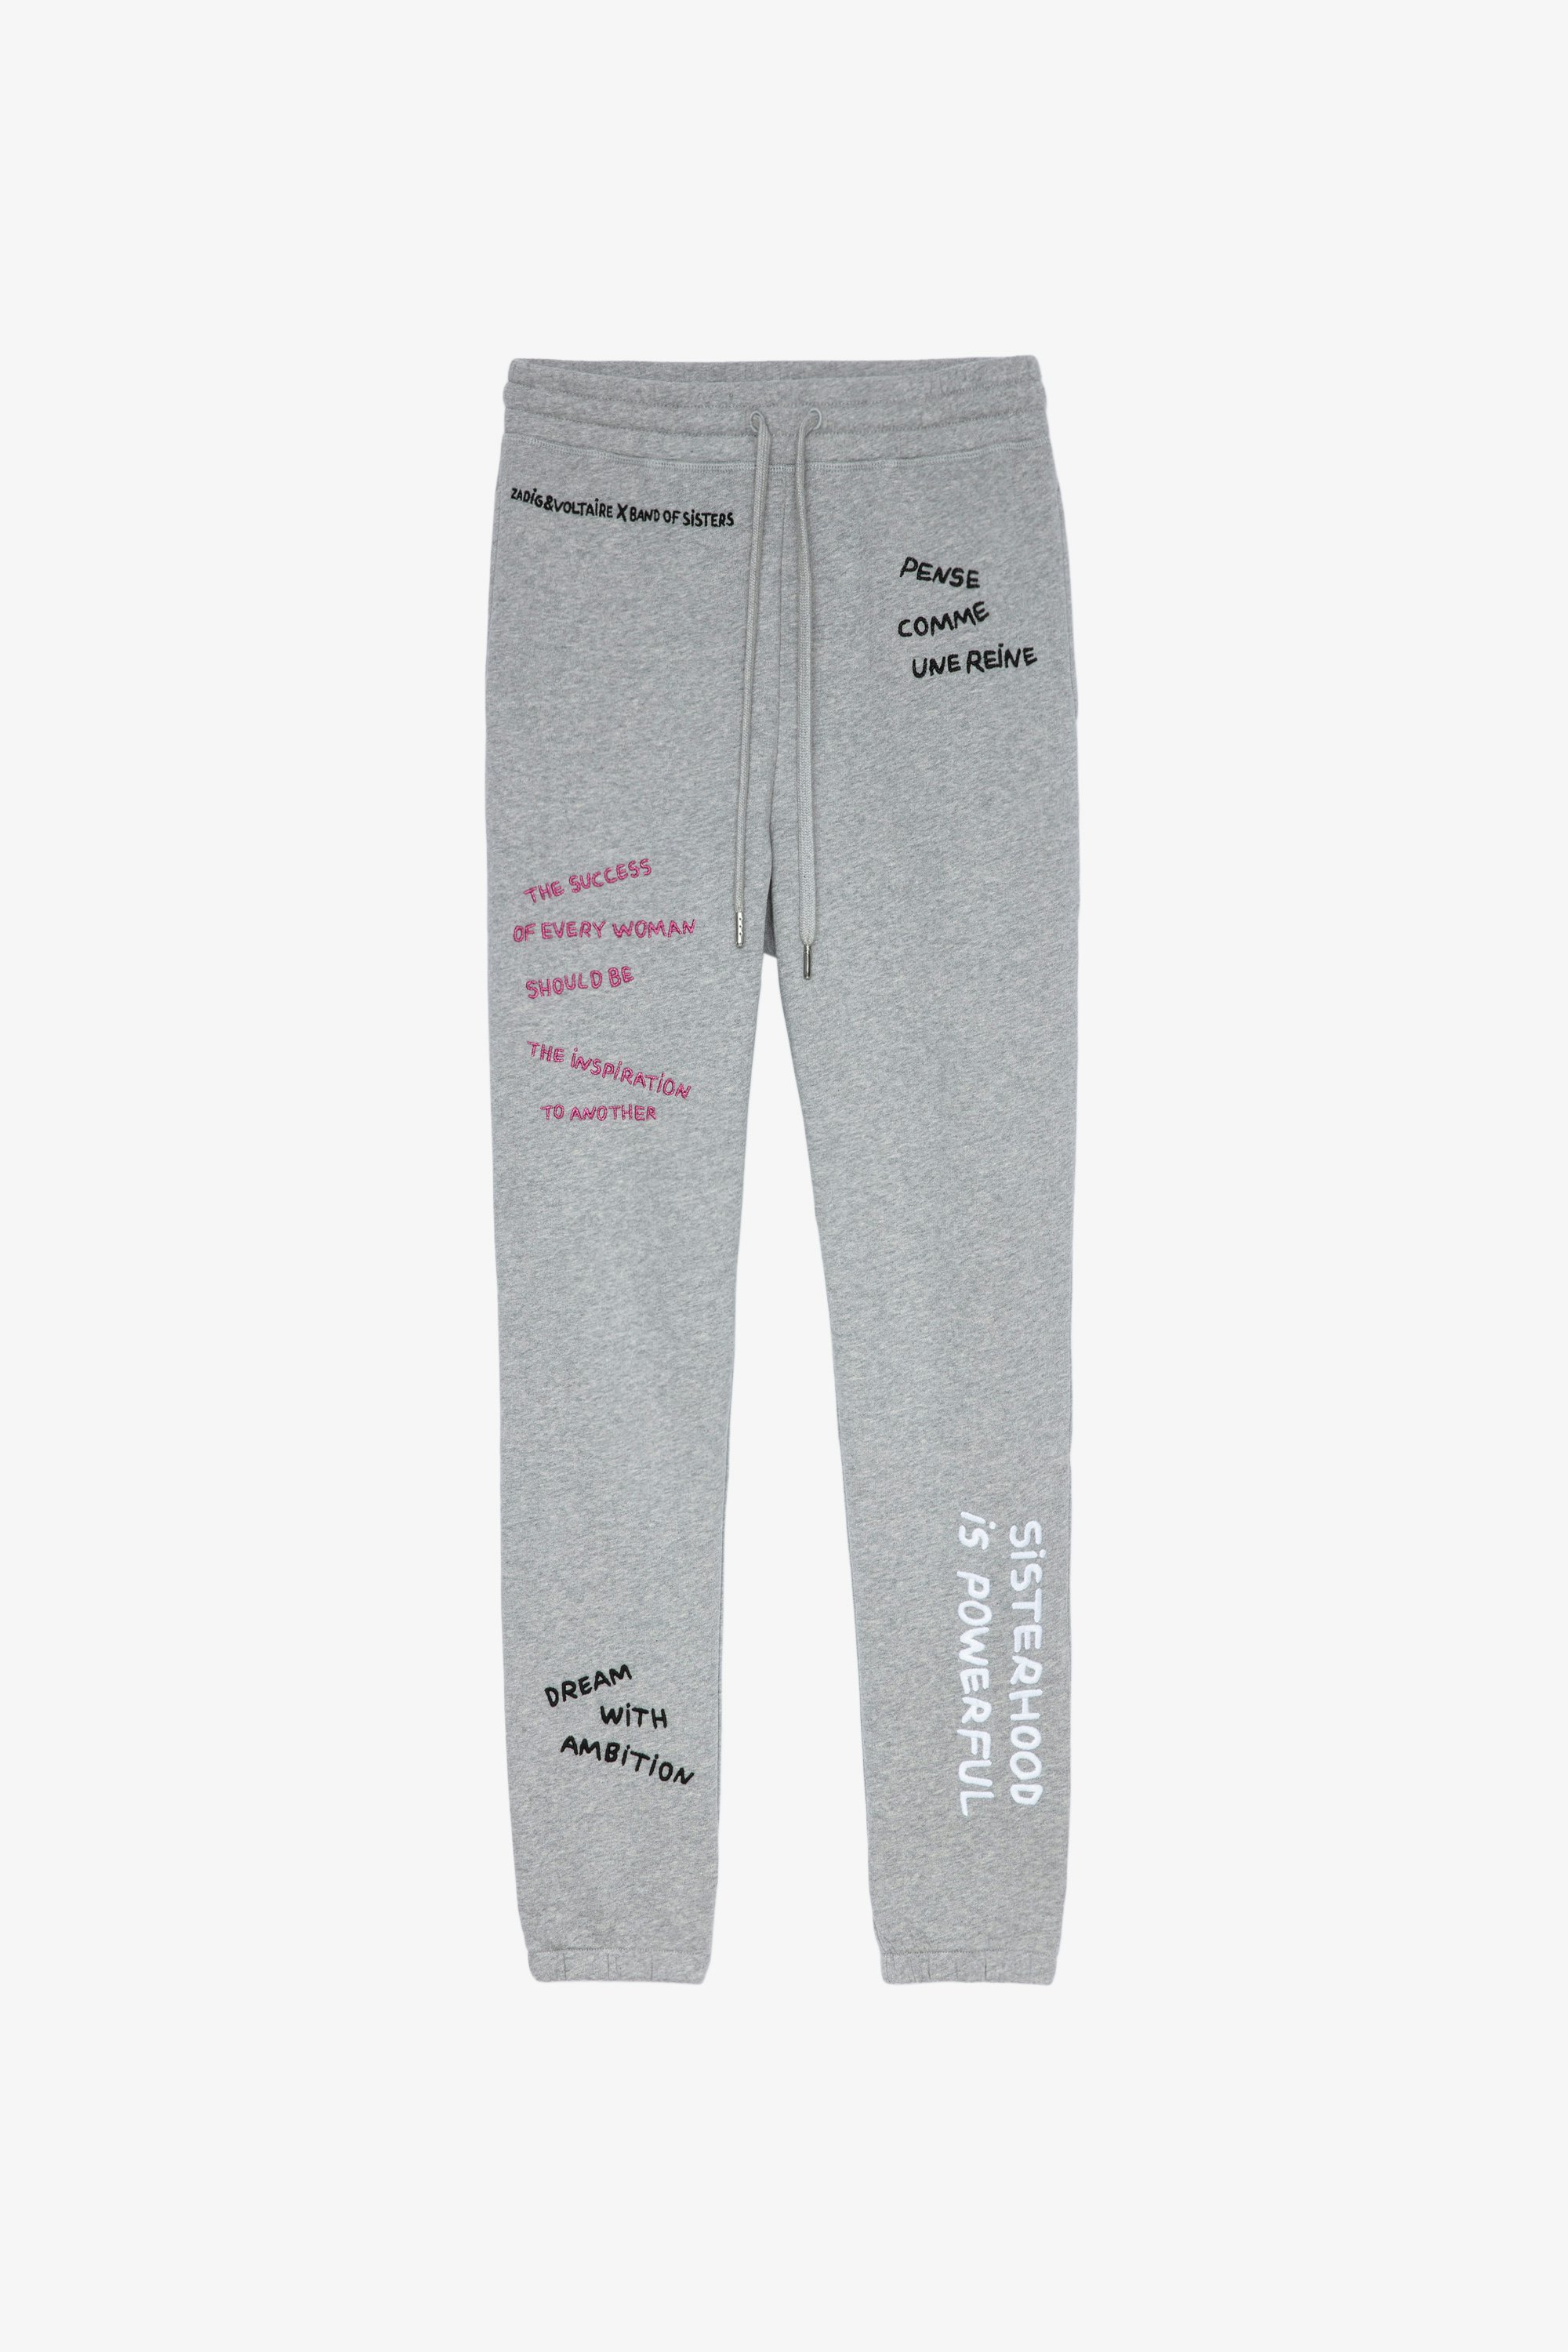 Band of Sisters Sofia パンツ Women’s grey marl cotton trousers with Band of Sisters inscriptions